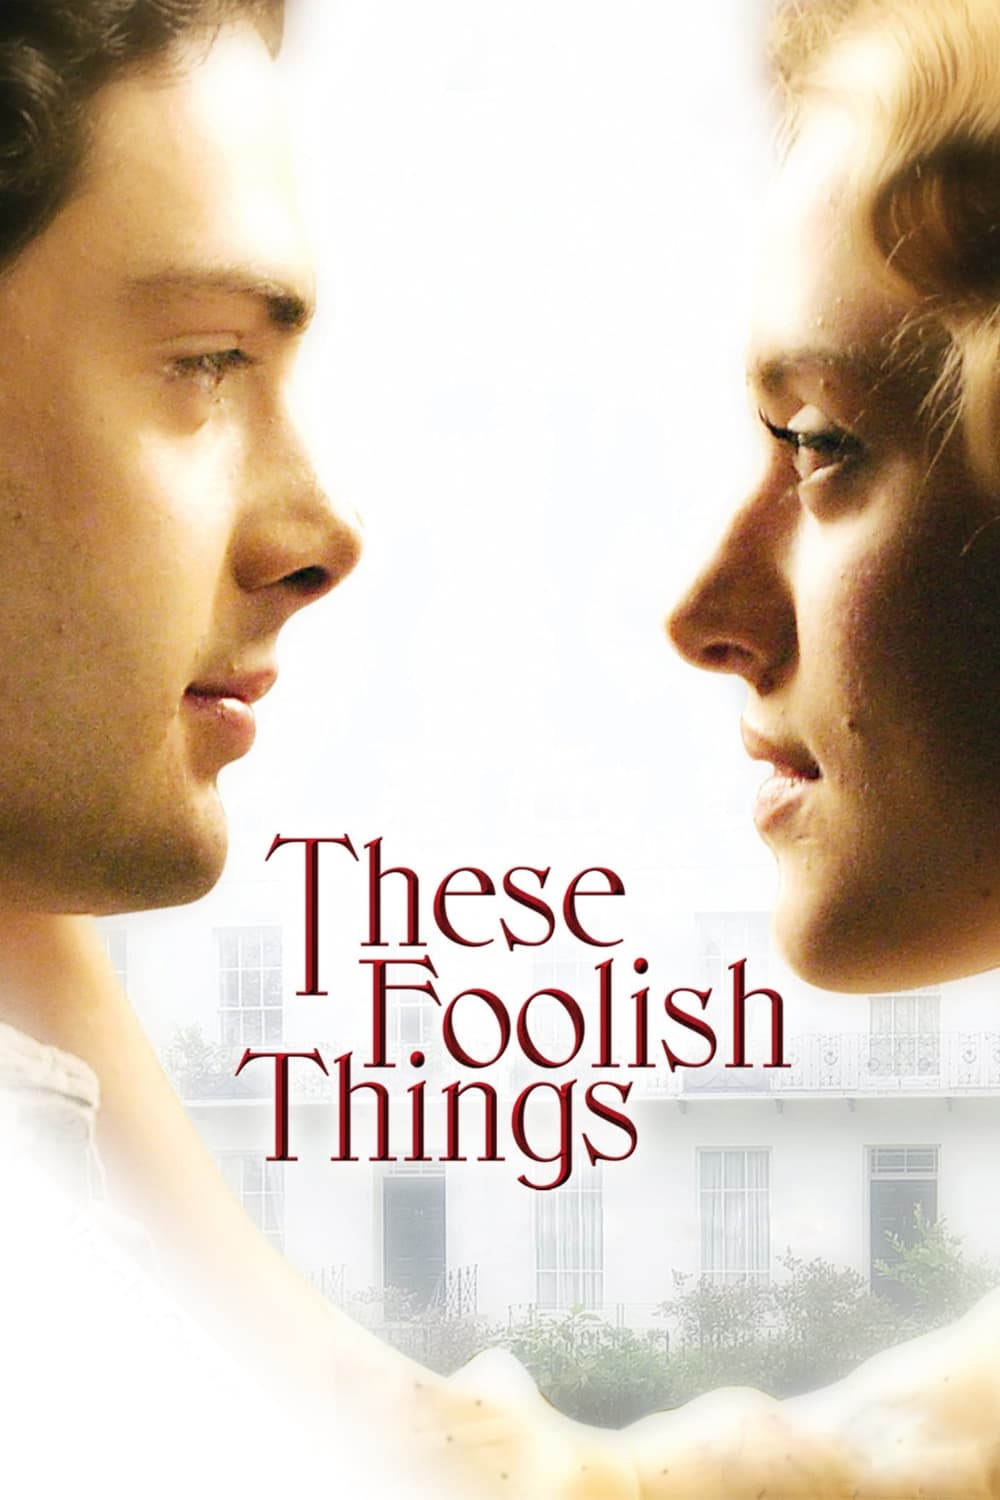 These Foolish Things (2006)